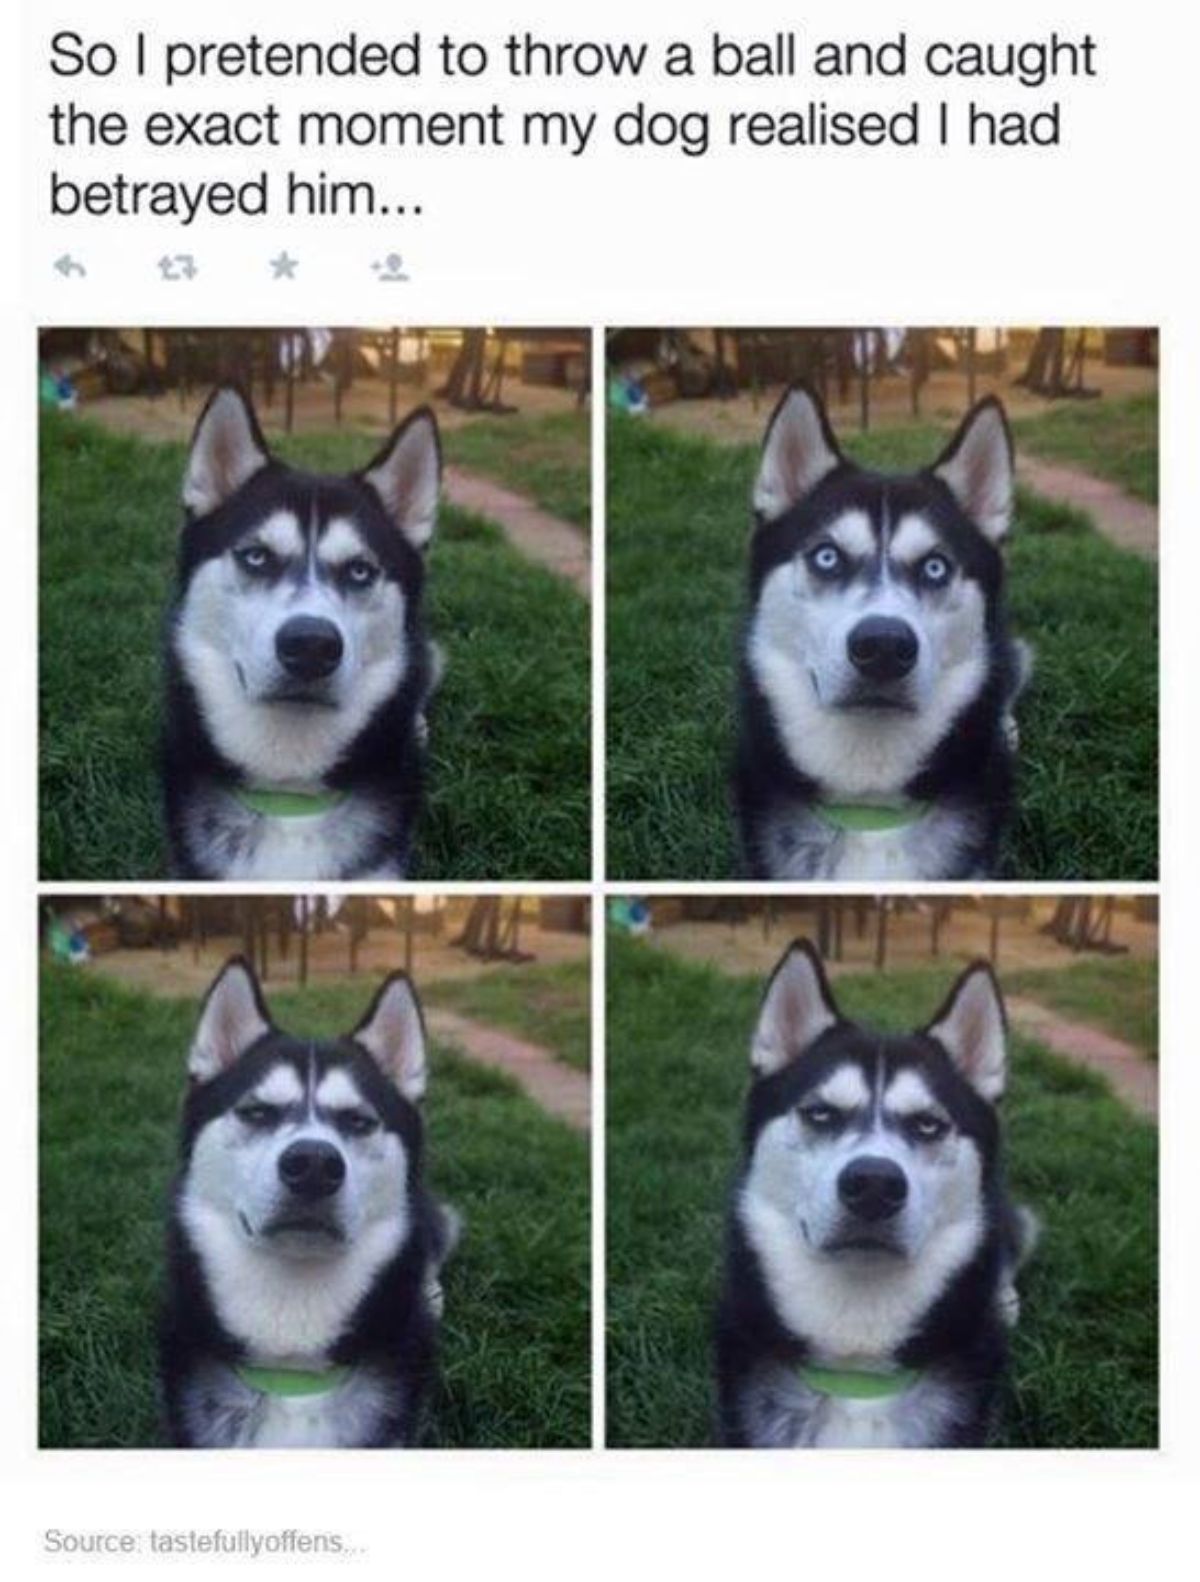 4 photos of a black and white husky being excited then annoyed at someone faking throwing a ball